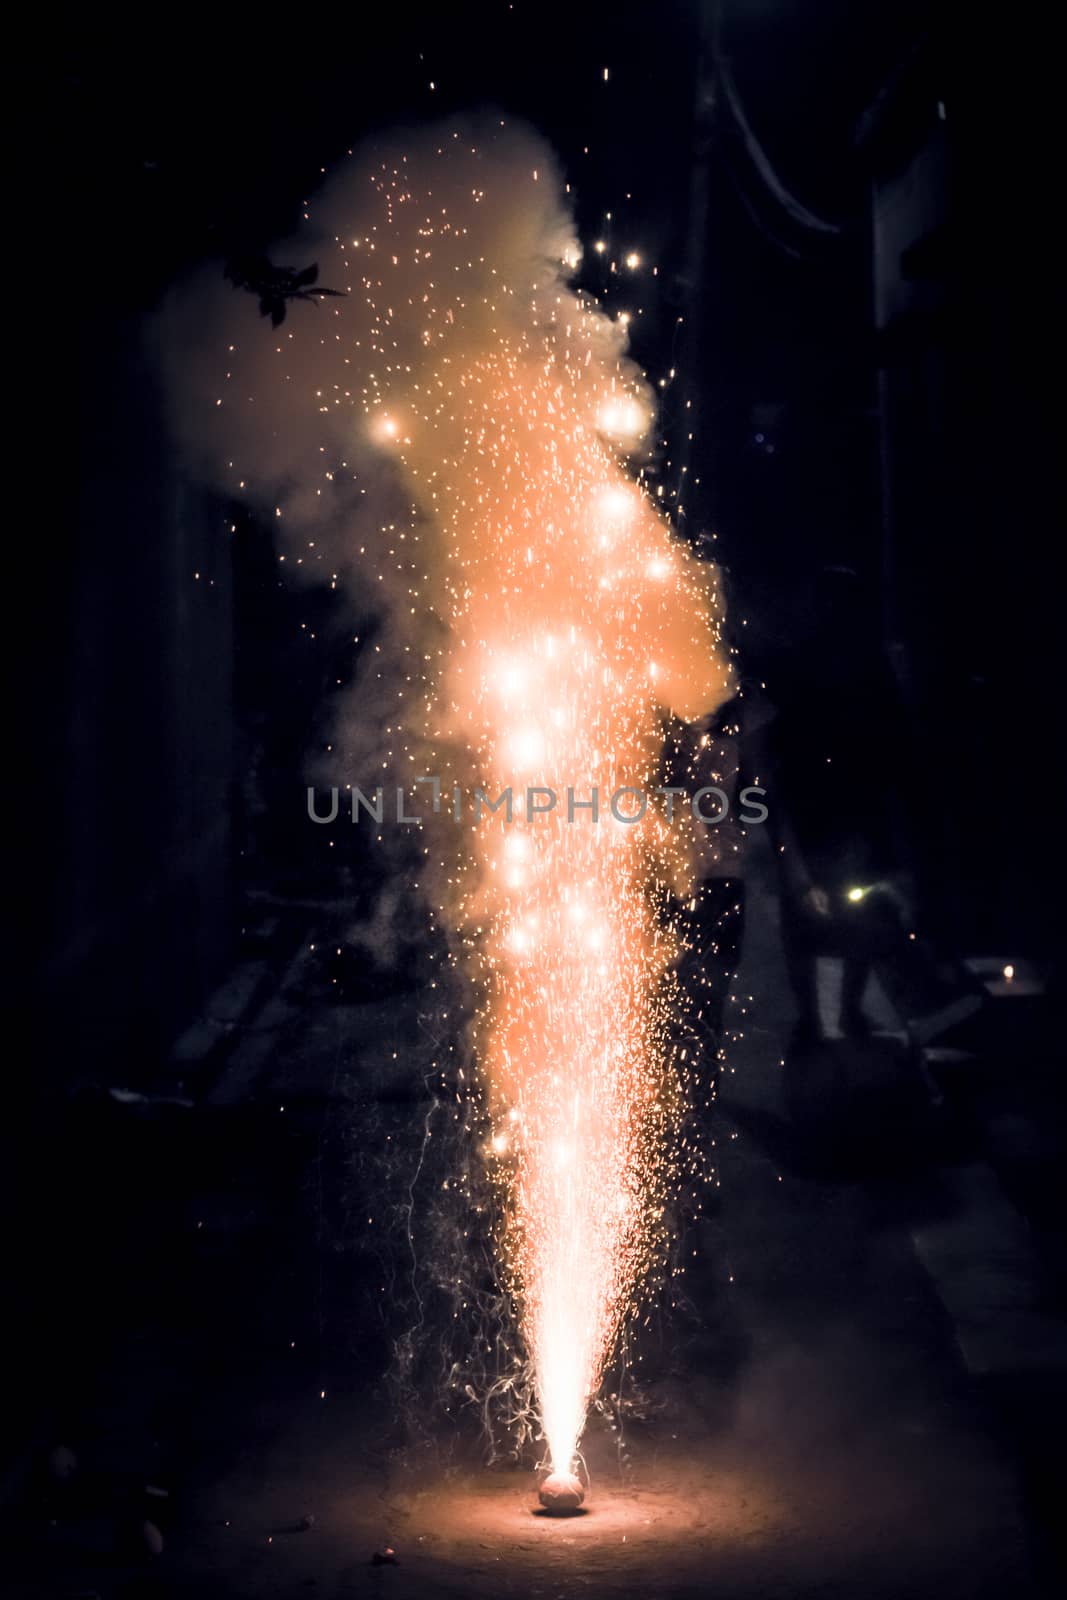 Bright and colorful fireworks showing display at night in City Street during Diwali festival celebration in Kolkata India. Close-up. Copy space room for text. by sudiptabhowmick